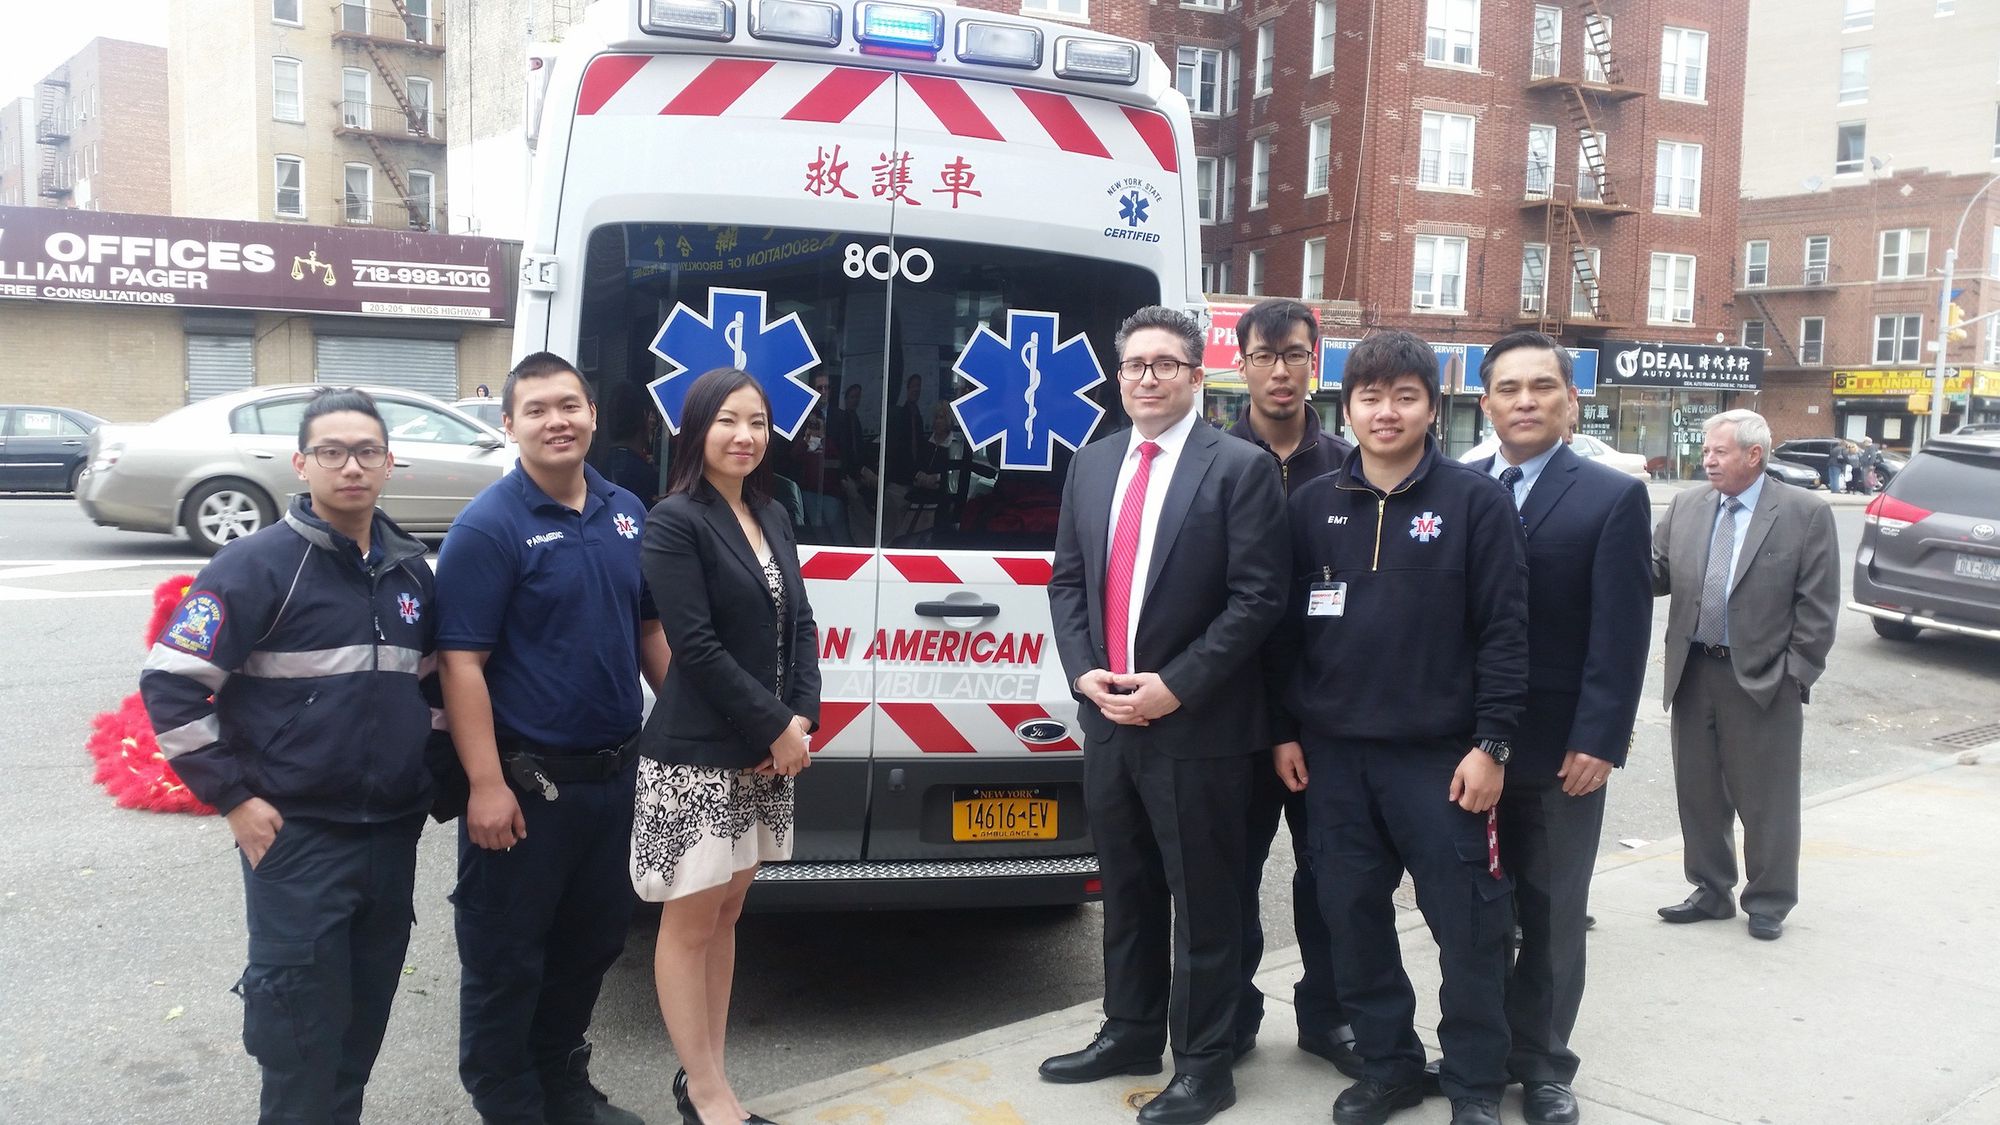 Some members of the team behind making the Asian American Ambulance a reality. (Photo by Heather Chin / Sunset Park Voice )